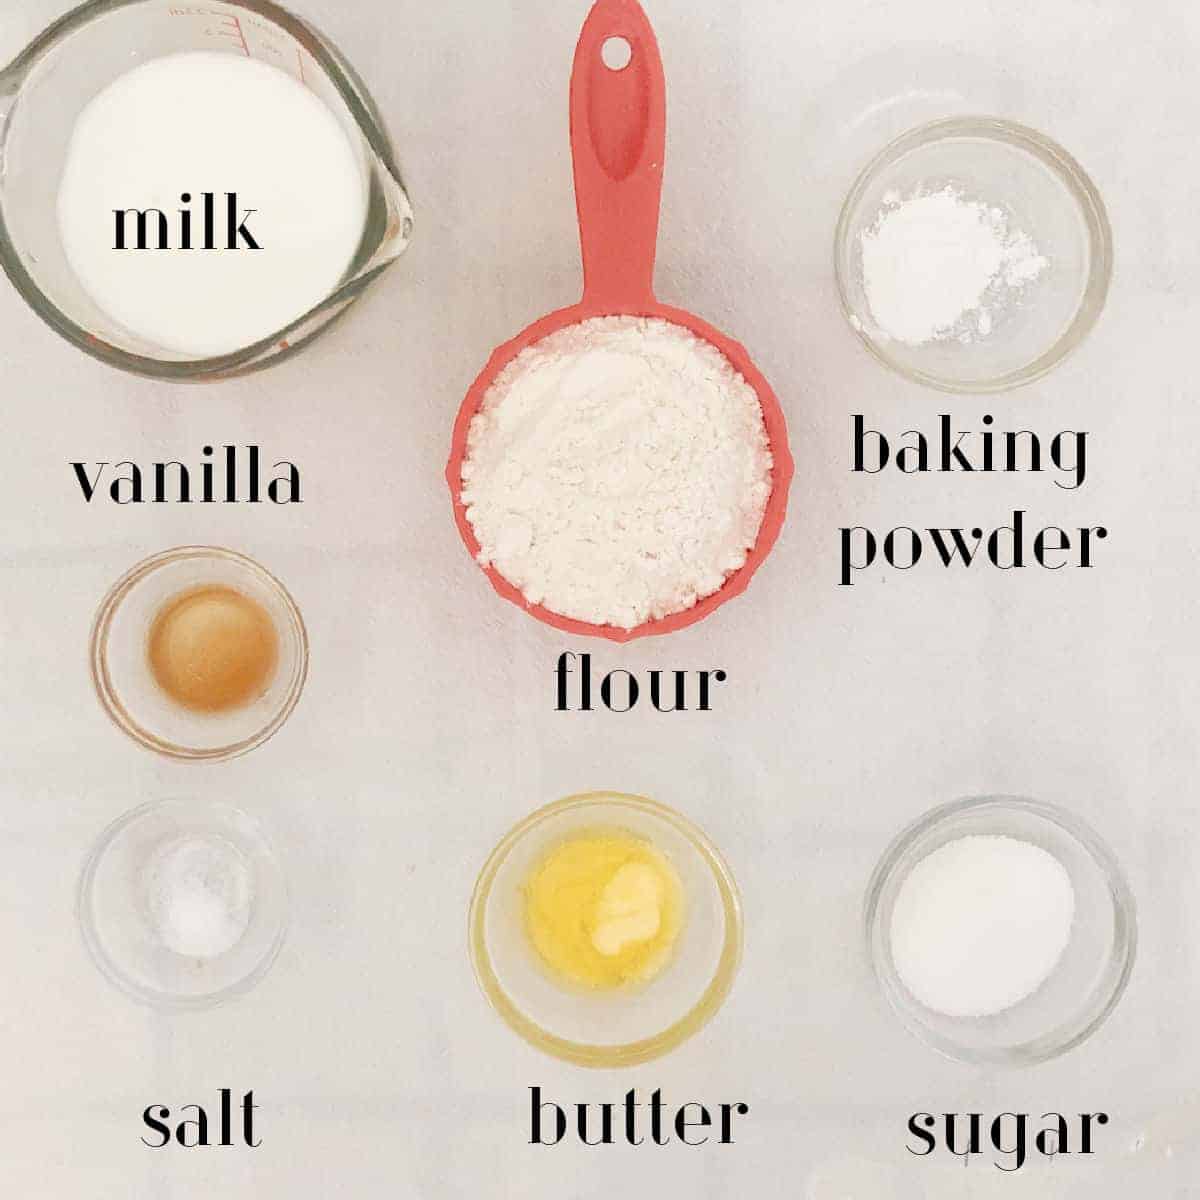 ingredients measure out to make homemade pancakes.